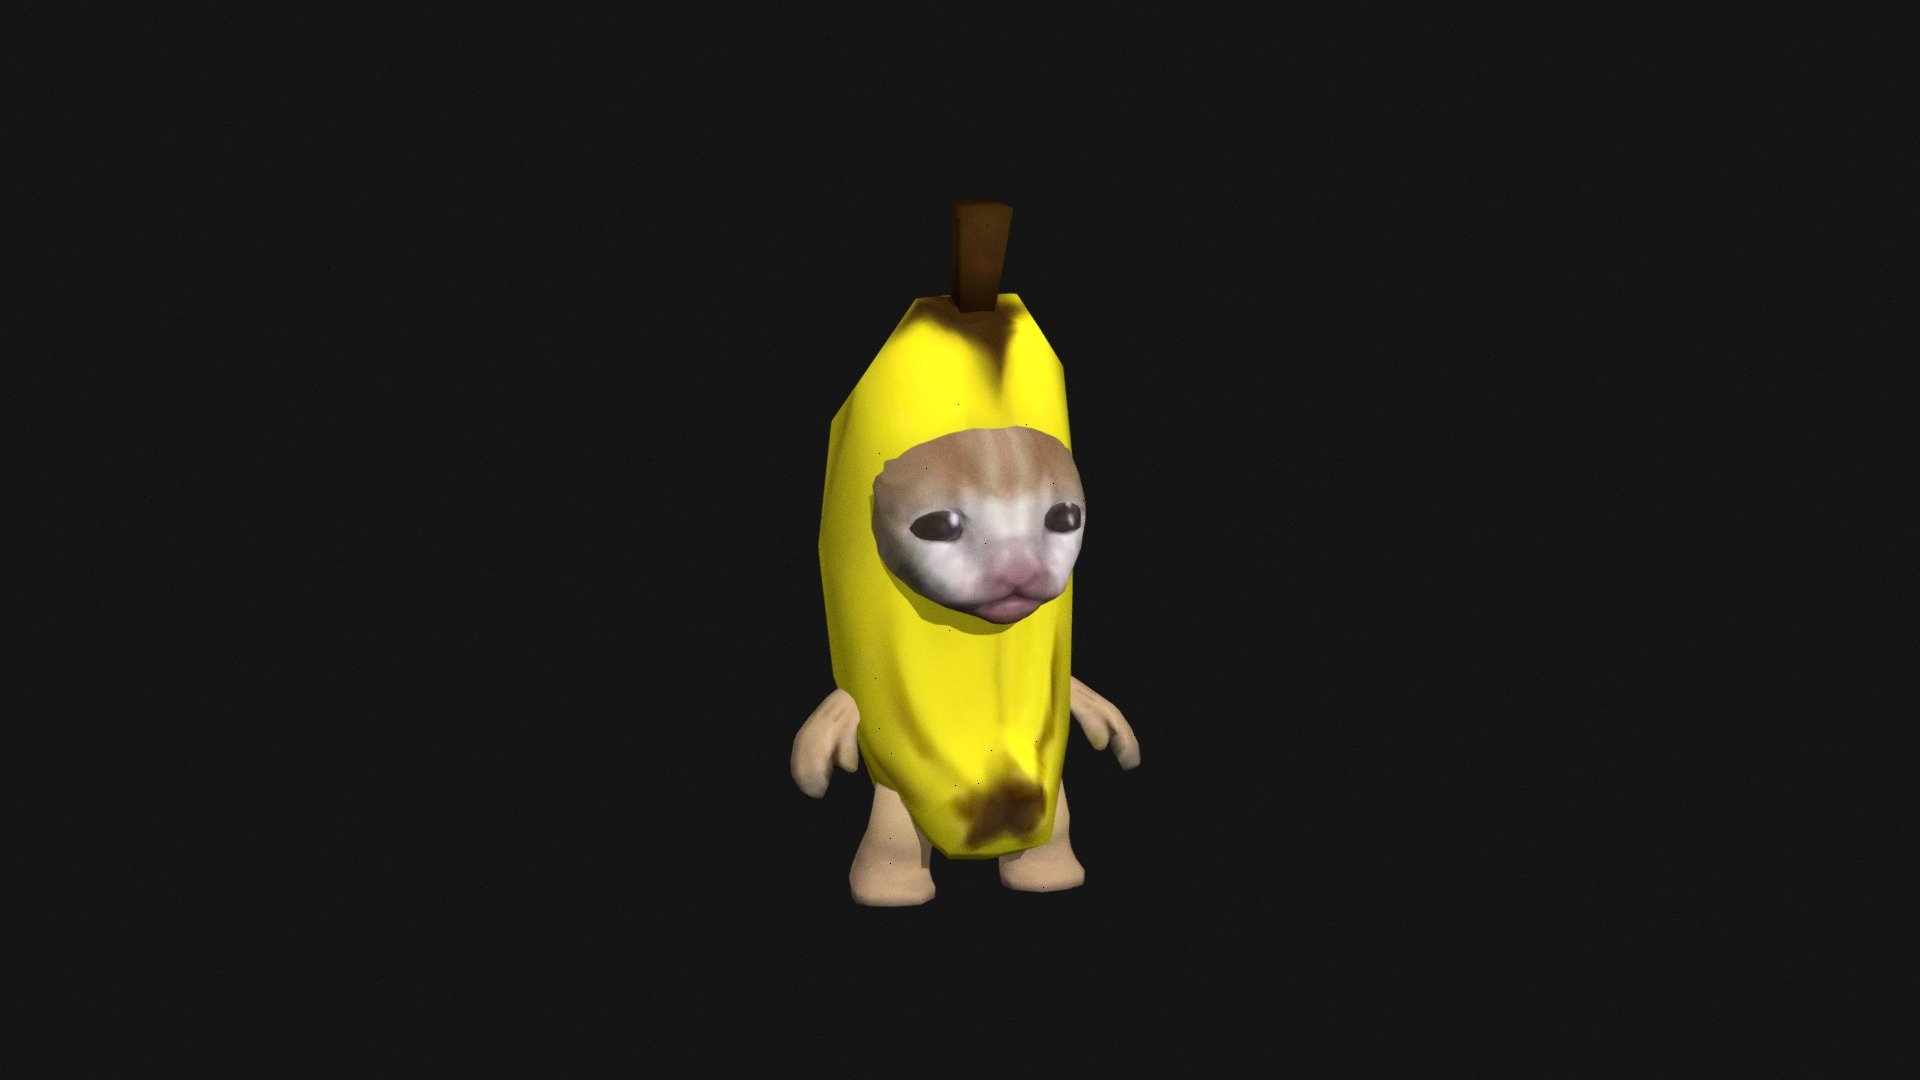 Gameready meme banana cat
Animations tested in unity
Looking for a new home! - bananaCat - 3D model by damn2605 3d model